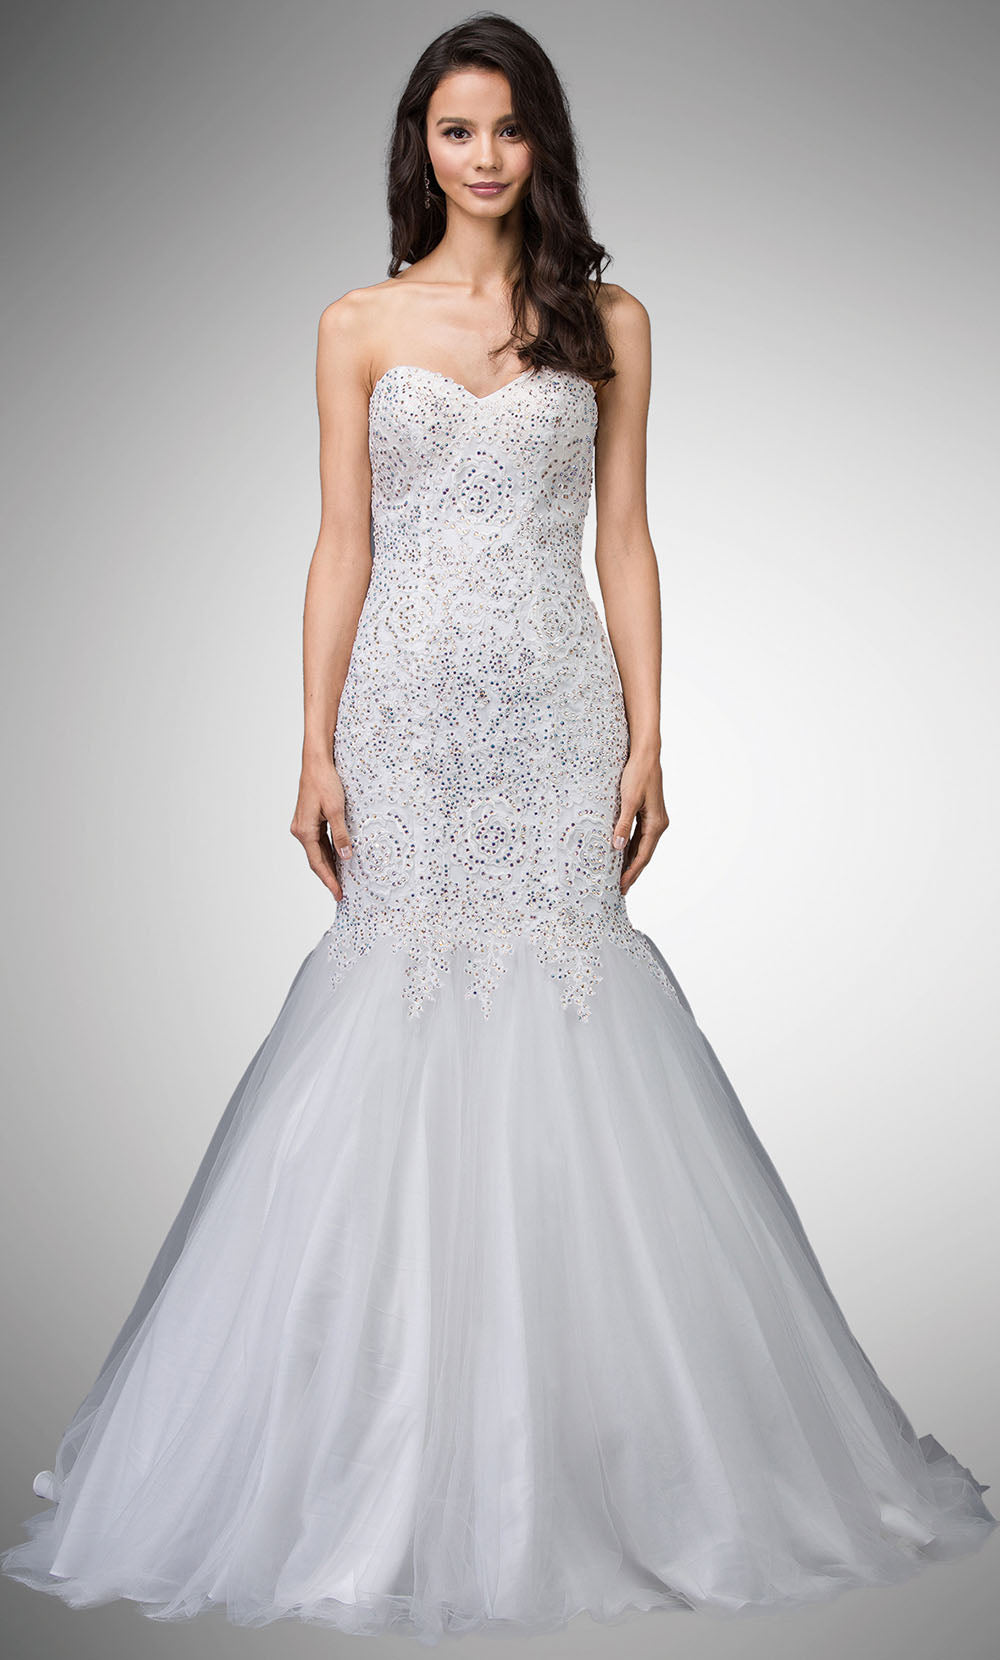 Dancing Queen - 9932 Strapless Beaded Lace Applique Mermaid Gown In White & Ivory